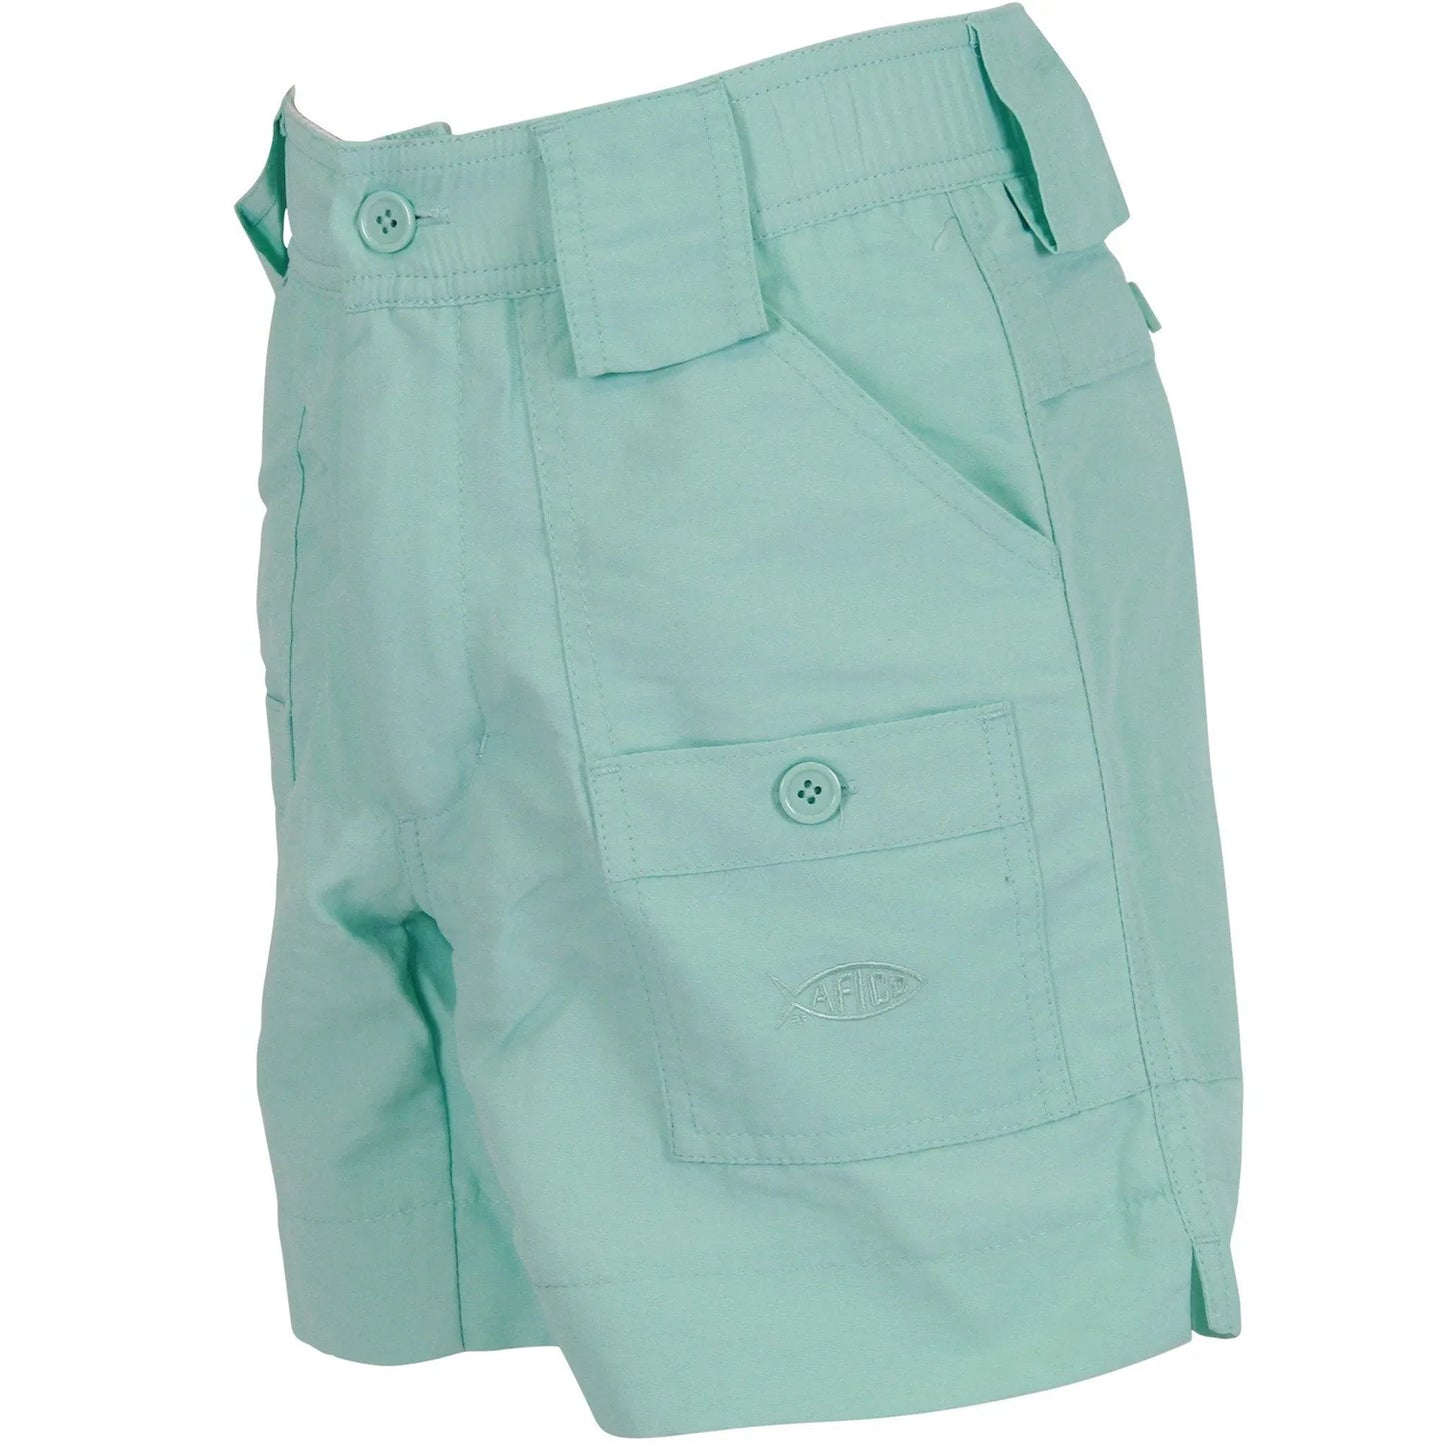 AFTCO Youth Fishing Shorts (6 colors)